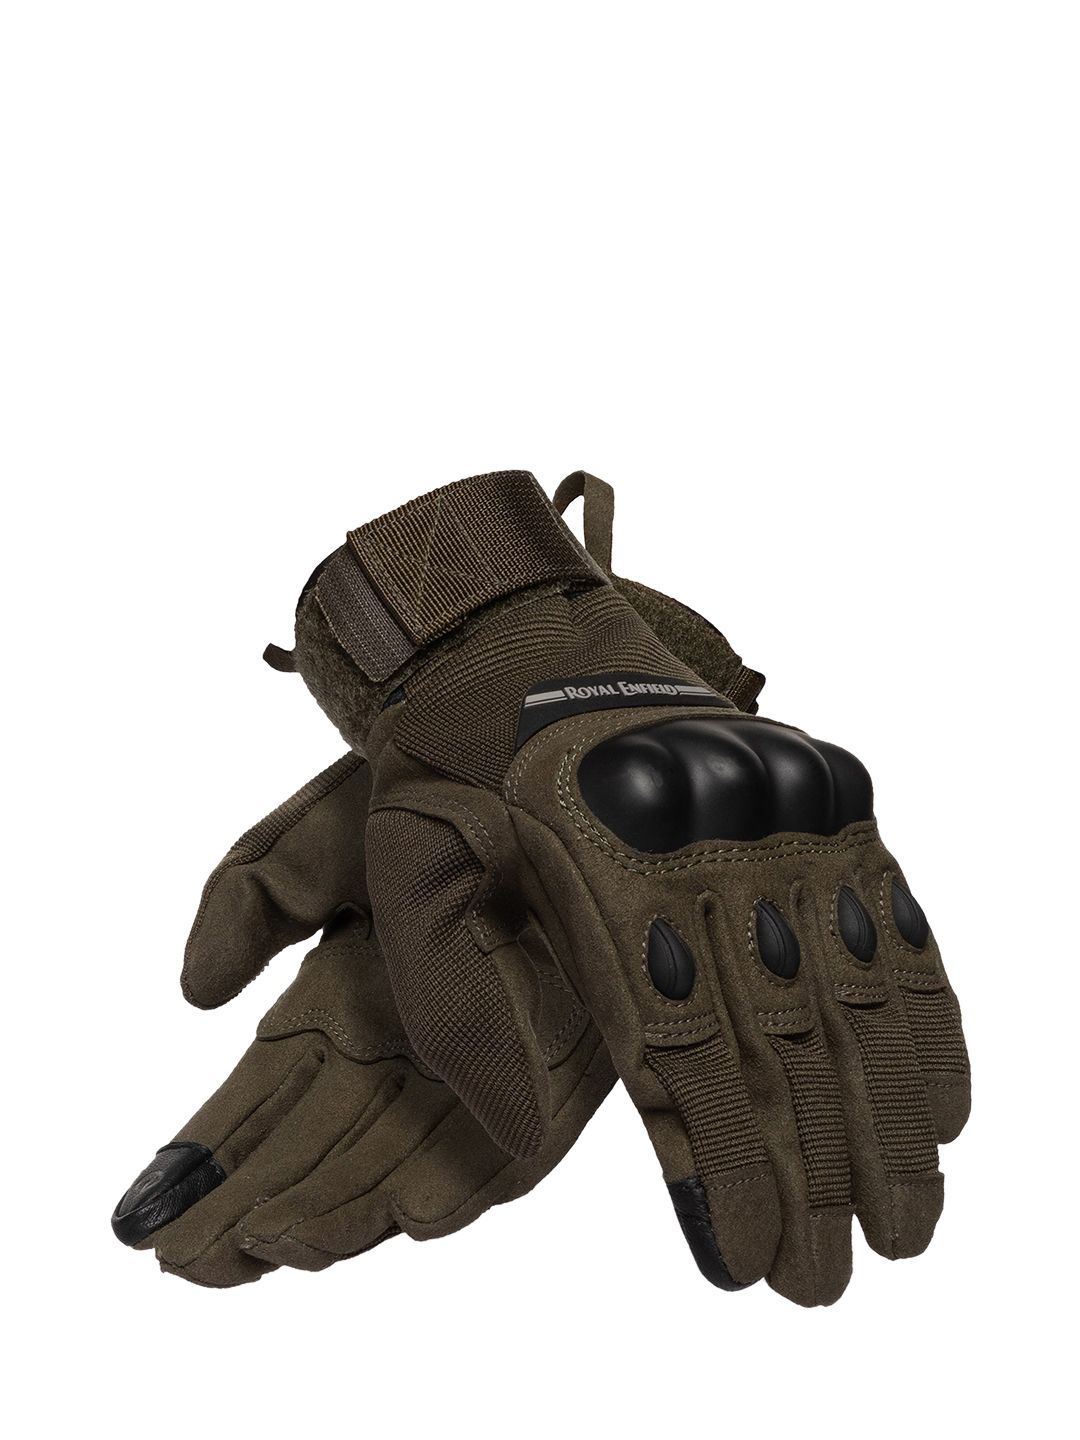 Royal Enfield Women Olive-Green & Black Textured Riding Gloves Price in India